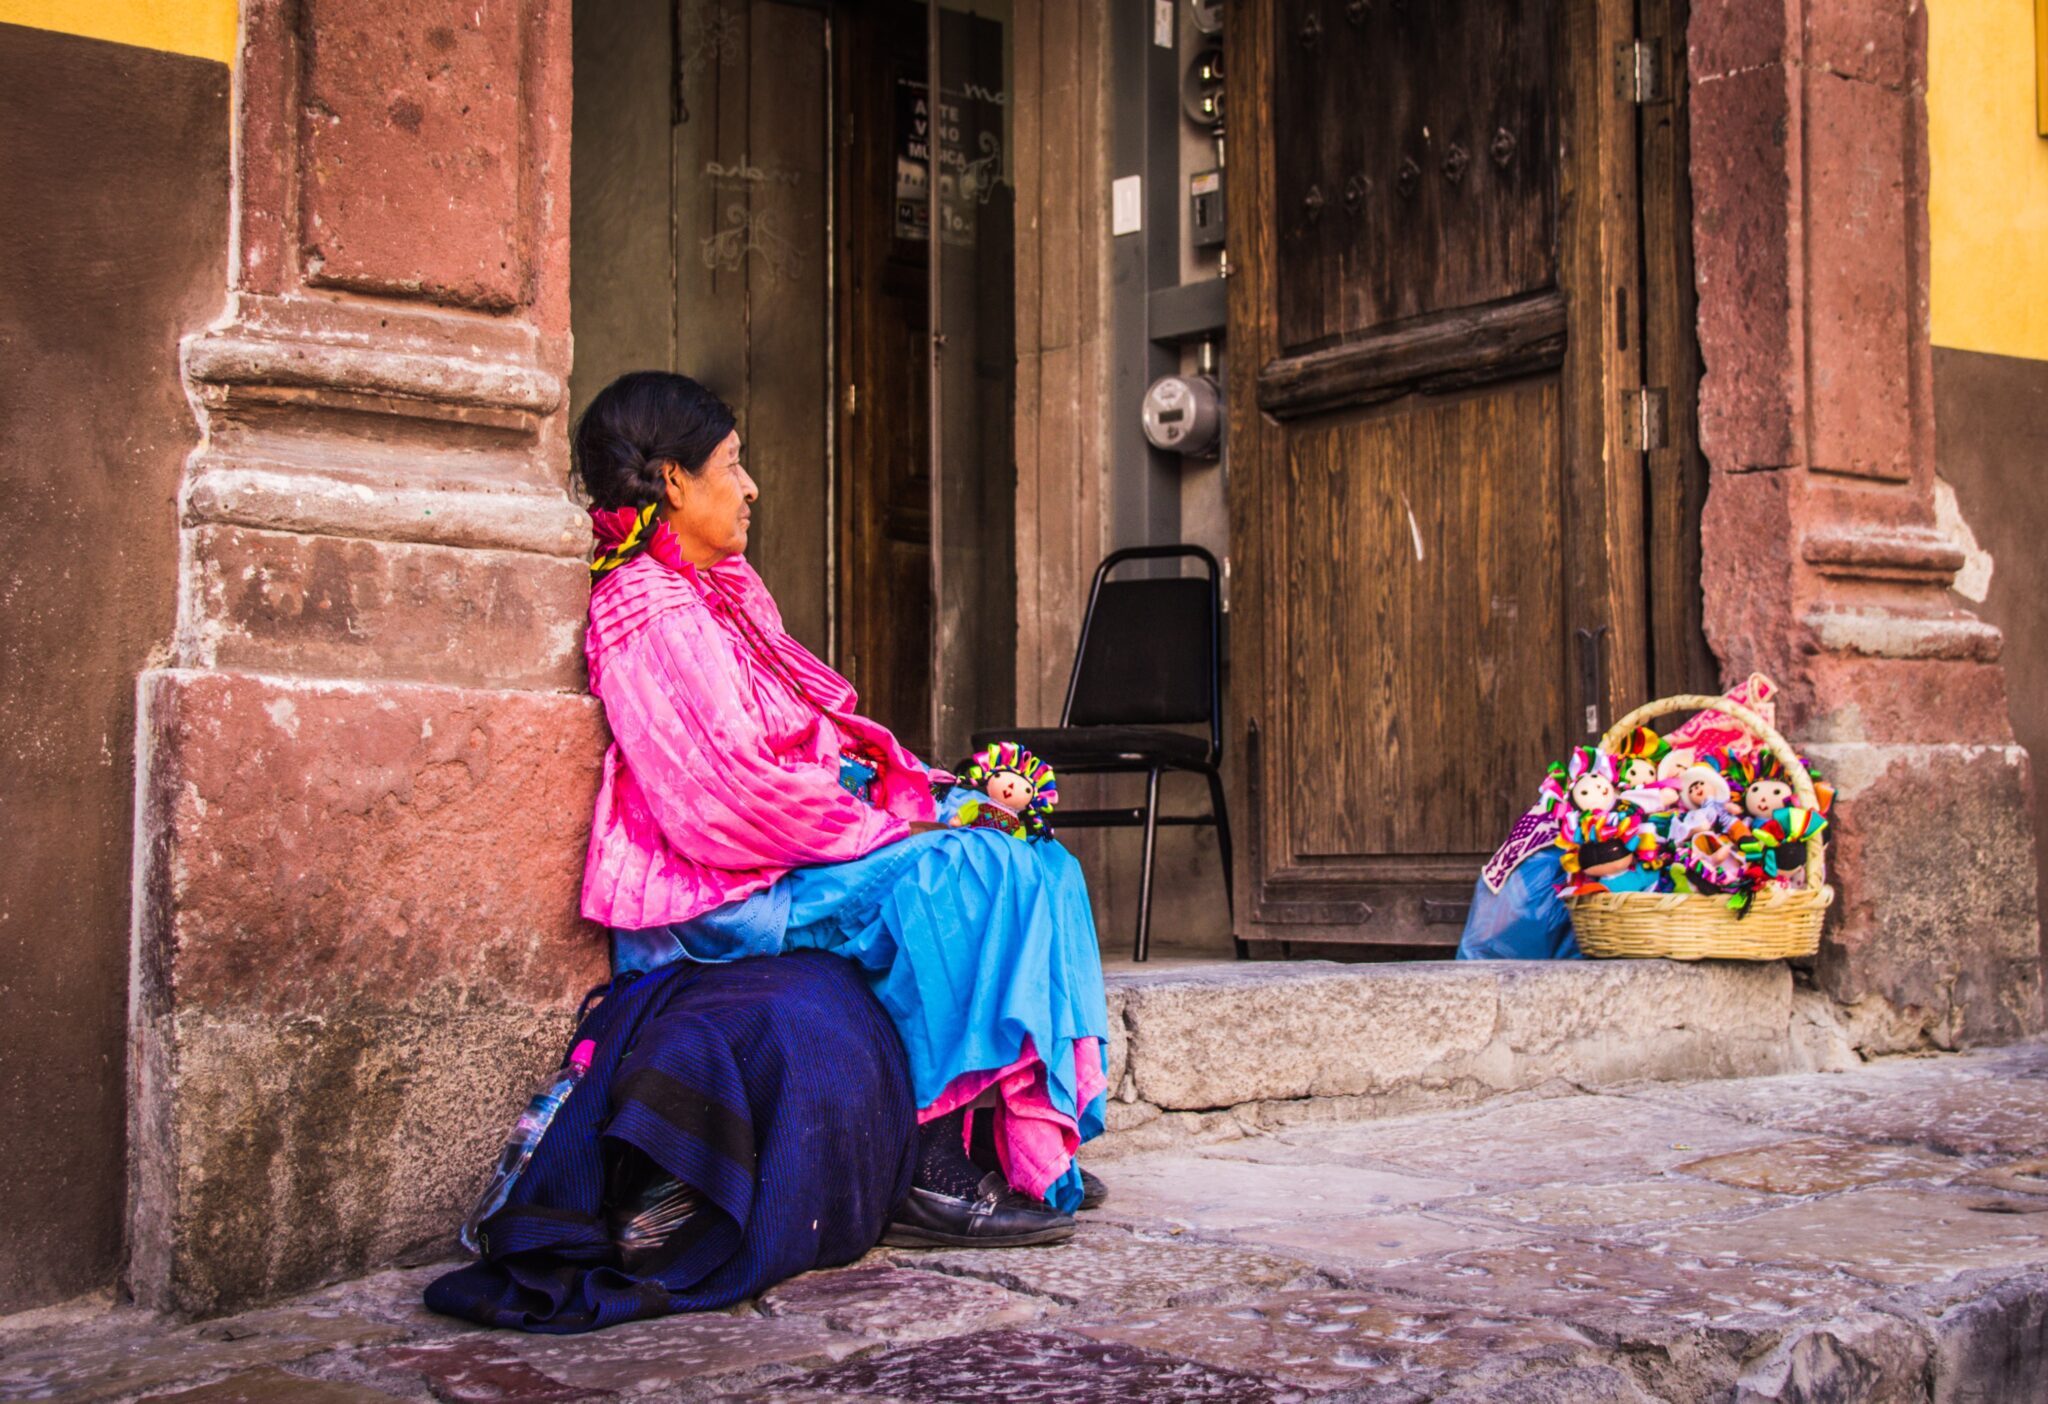 Indigenous Mexican woman selling dolls. Source: Unsplash 